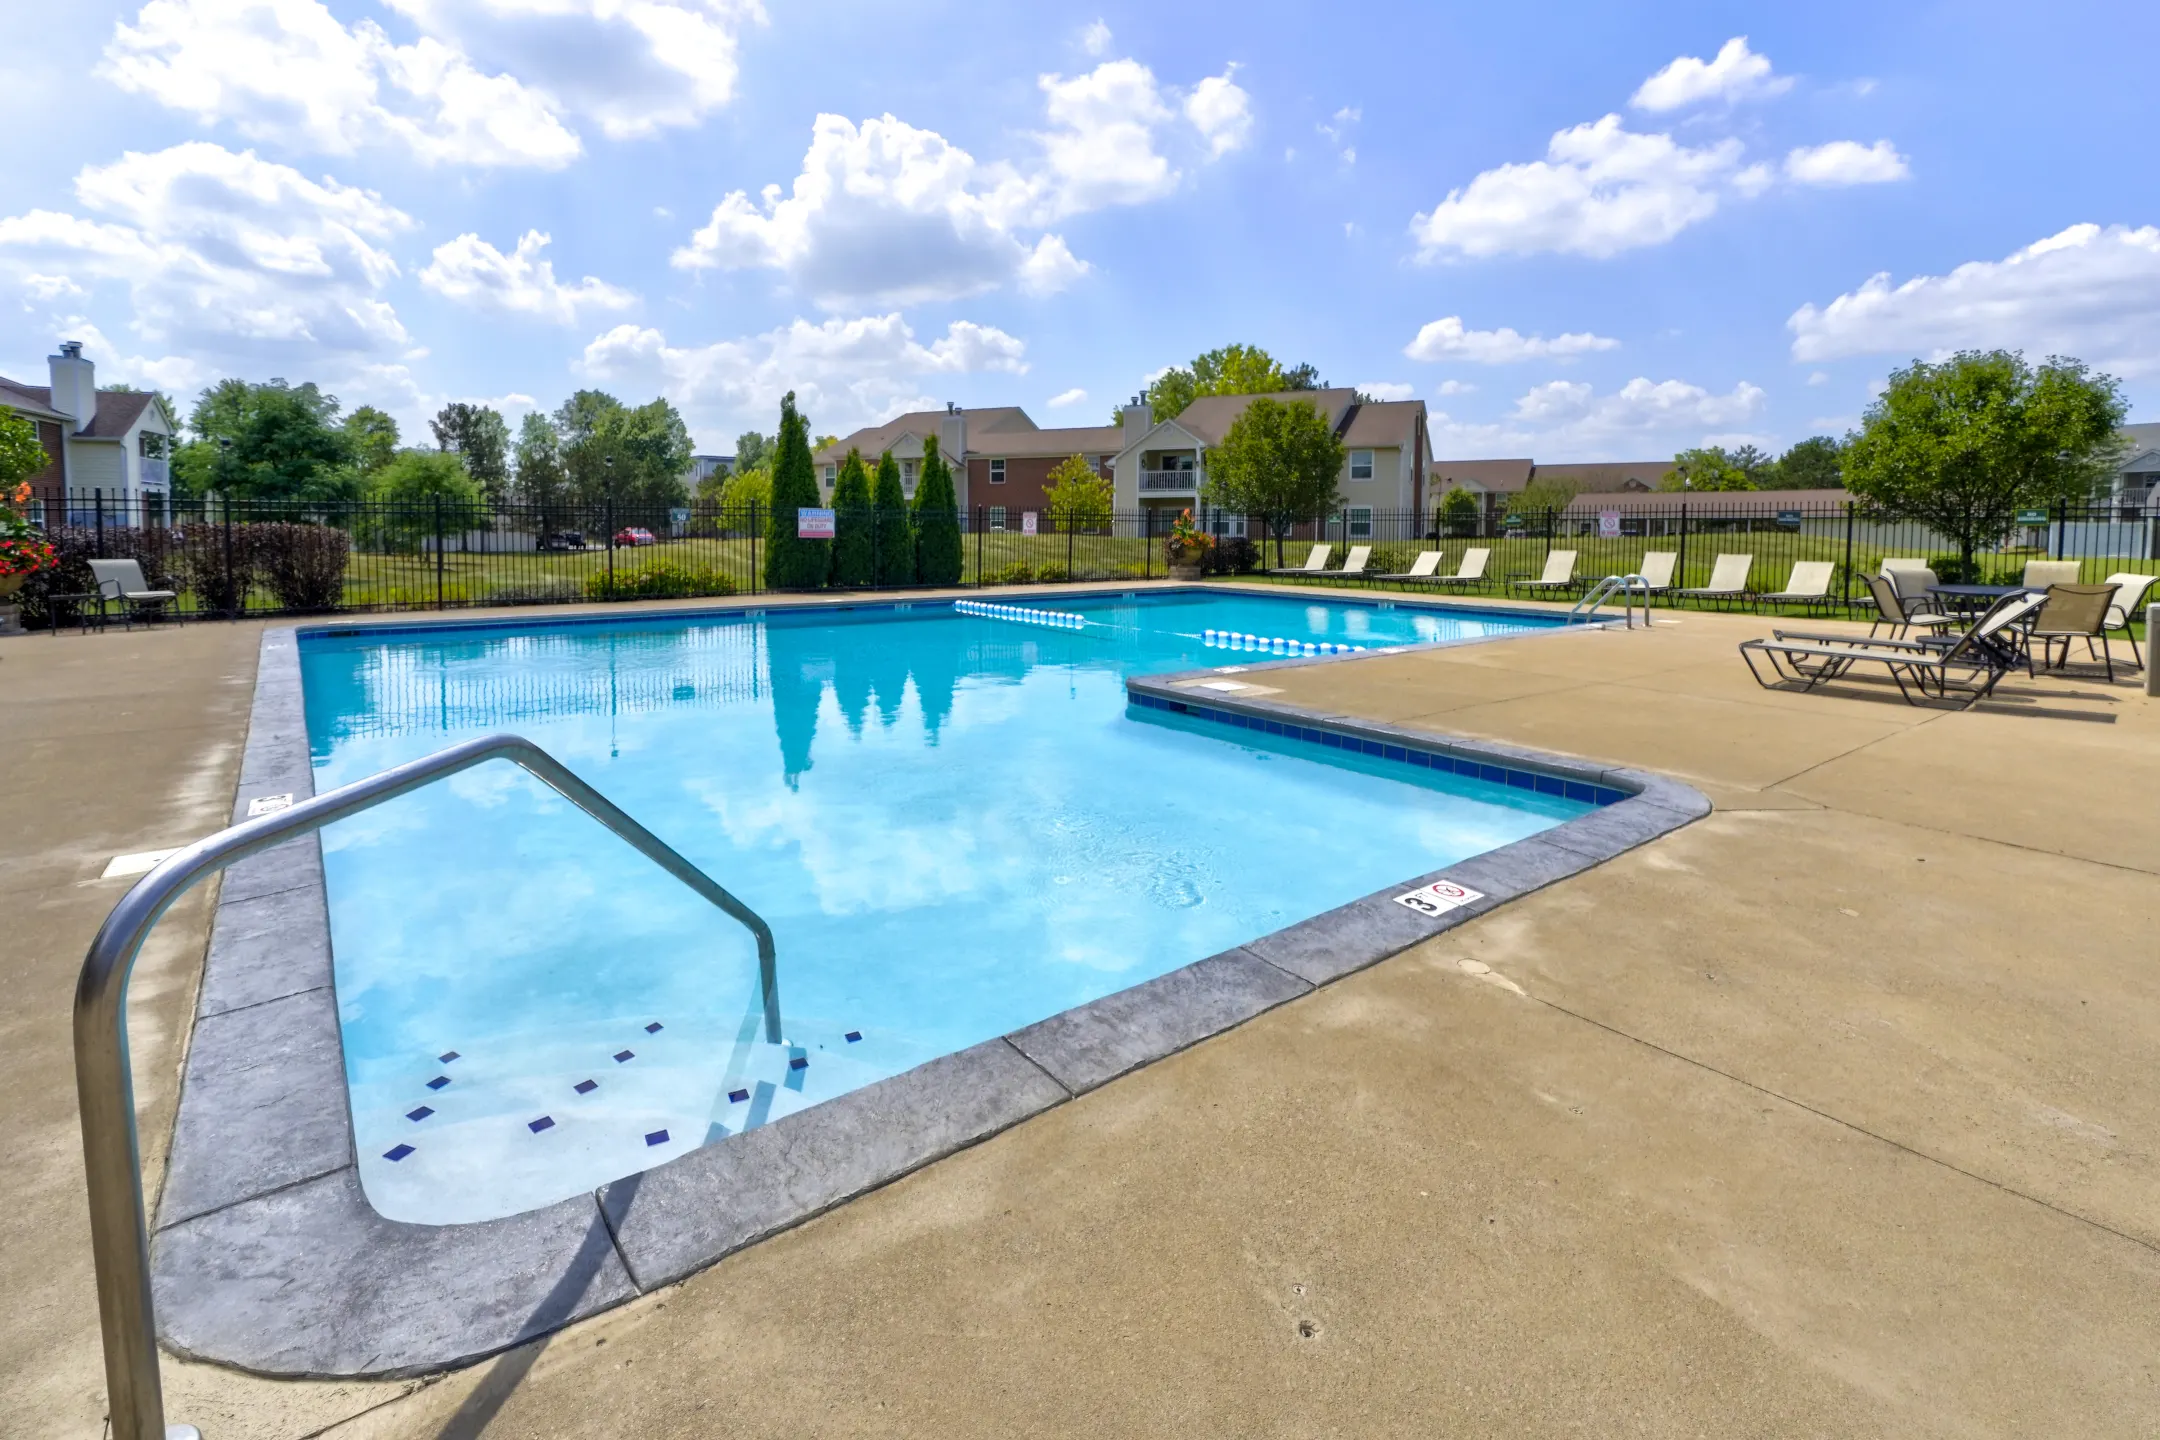 Pool - Sunblest Apartment Homes - Fishers, IN